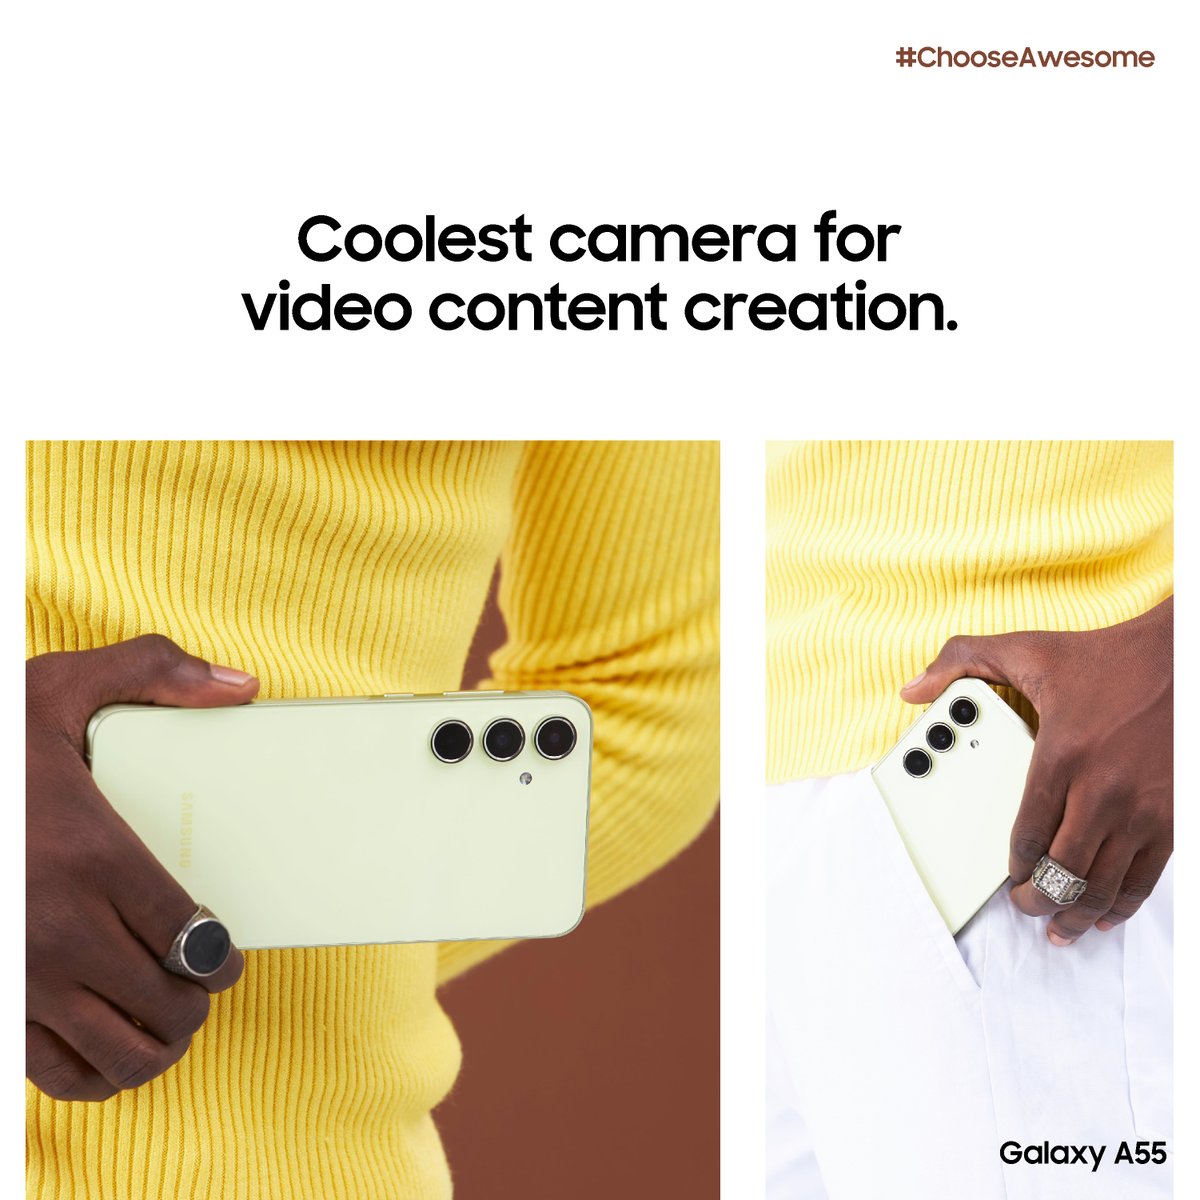 For the content creator in you --- An Awesome Galaxy A55 is just the smartphone you need. Get a FREE Travel adapter and silicon case when you shop this at a Samsung retail store near you. #ChooseAwesome